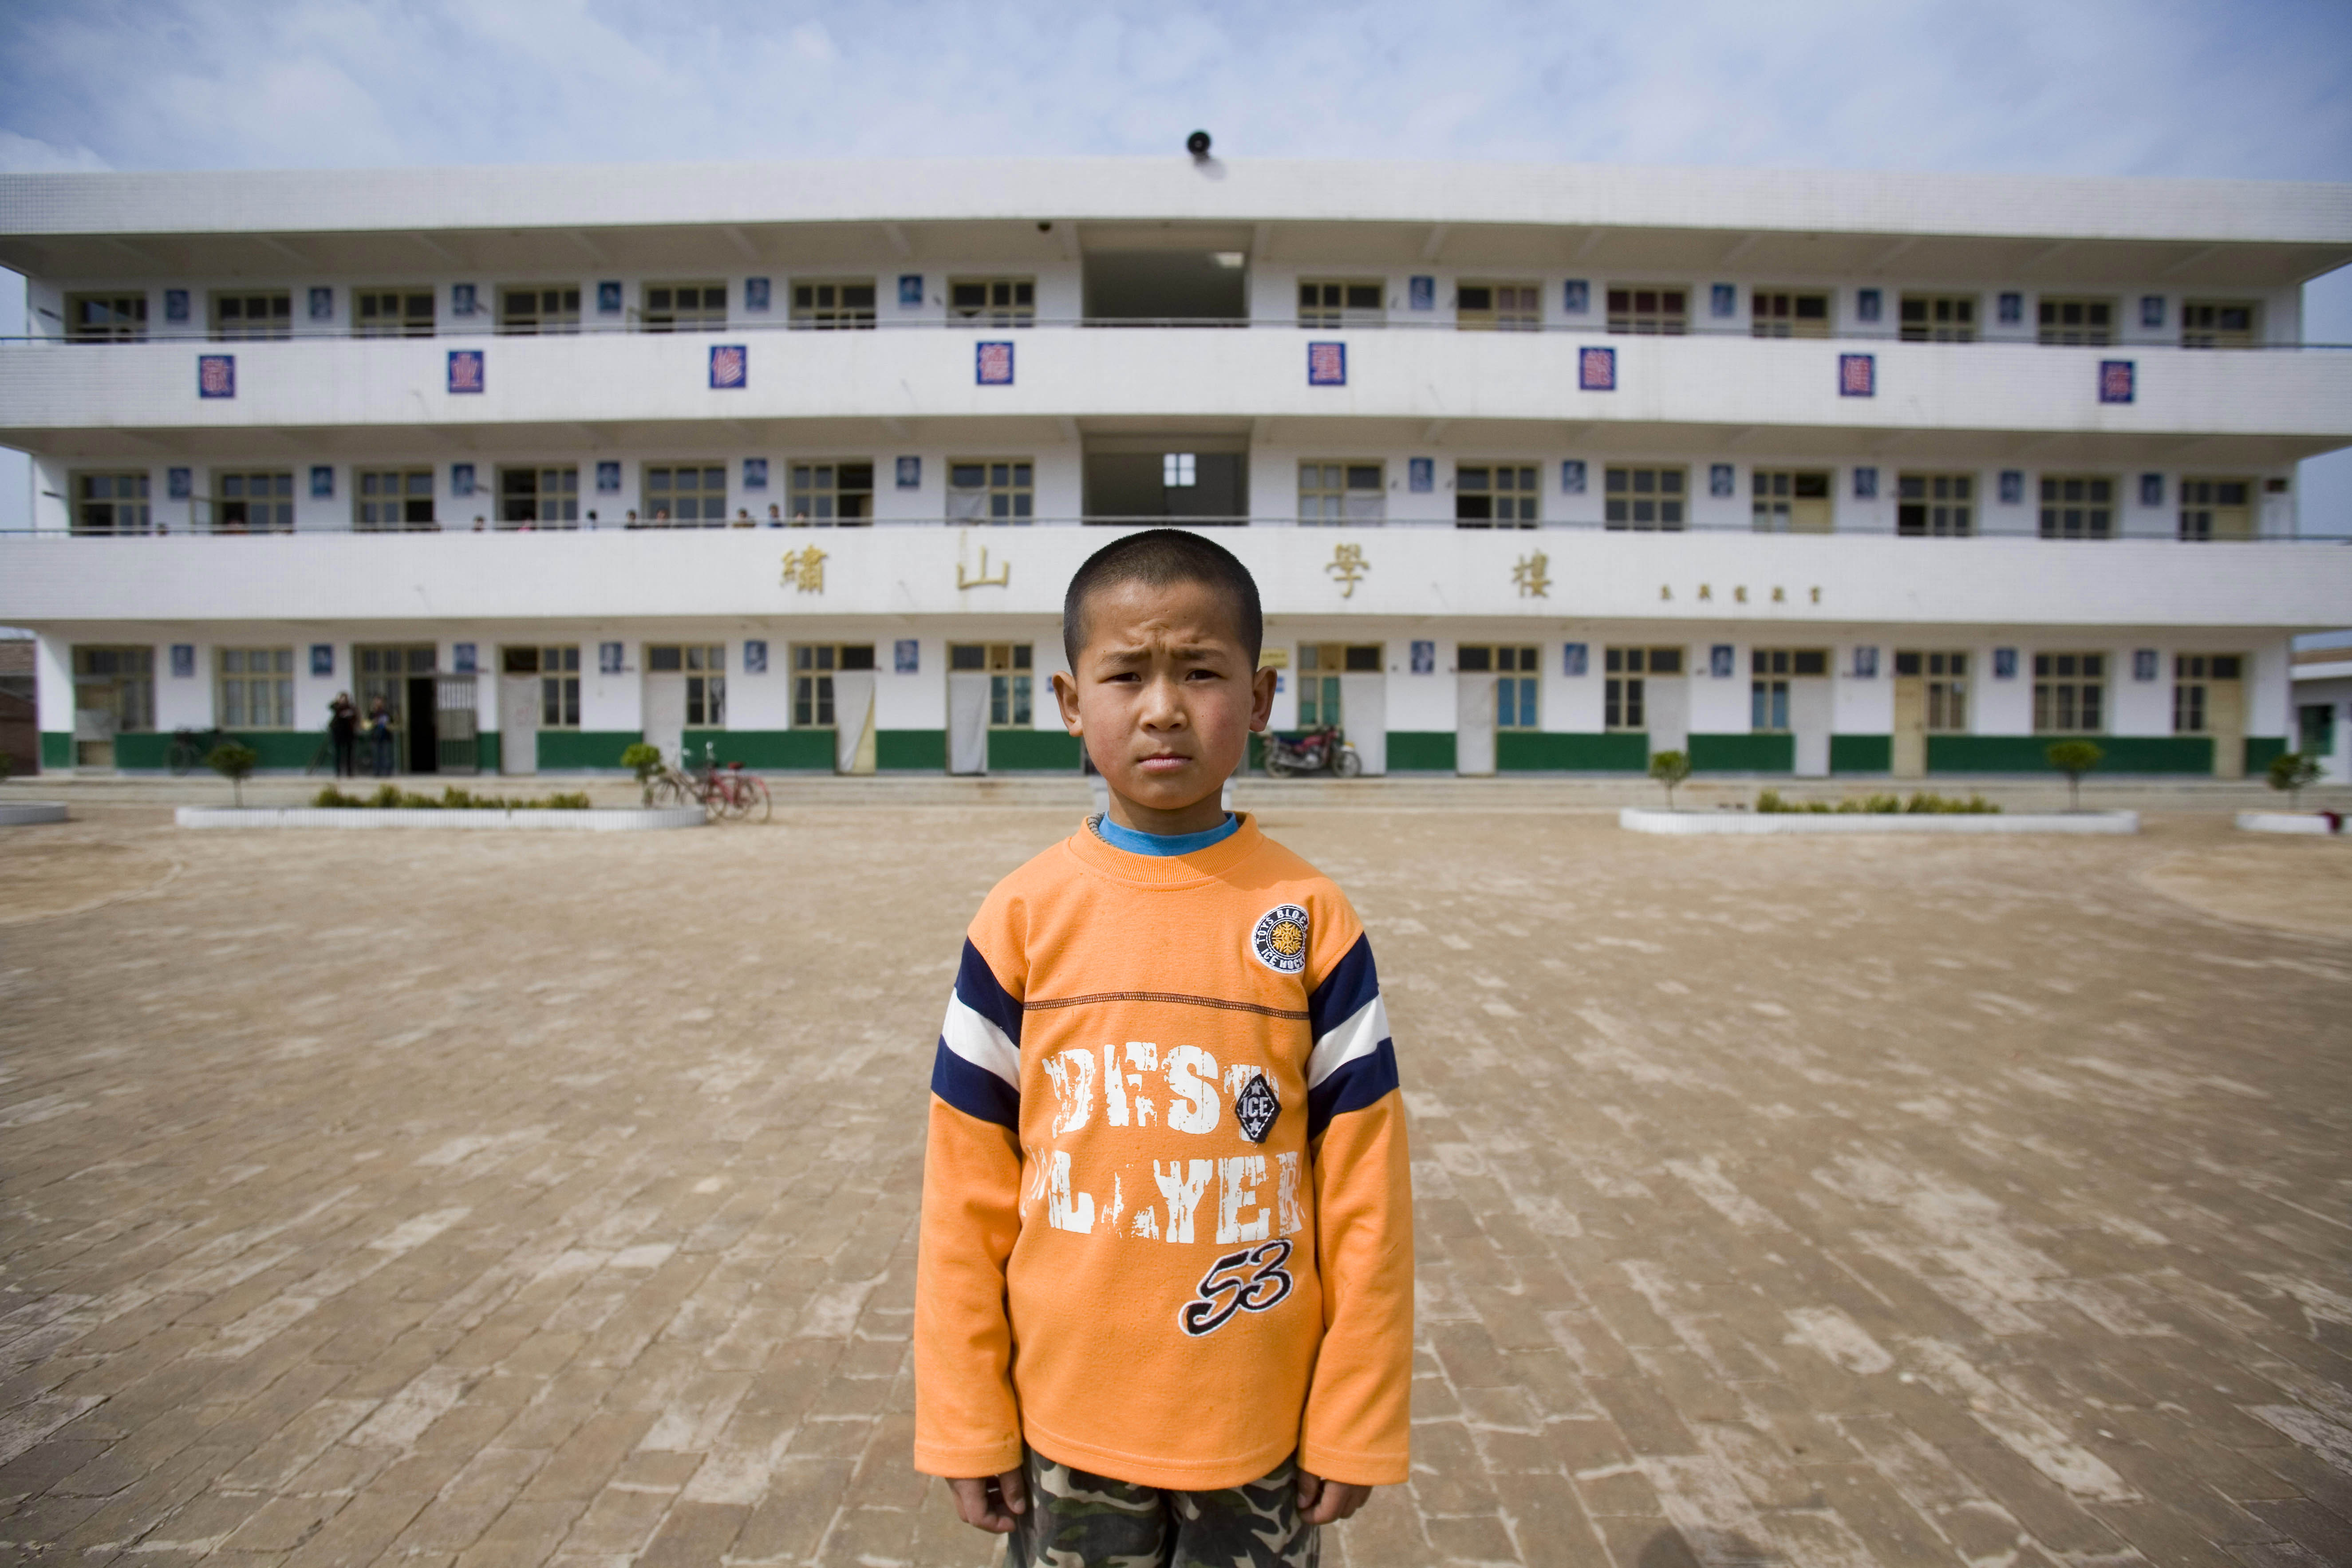 Liu Shi, whose parents have moved to Hangzhou to be migrant workers, at his school in Chunhua county in Shanxi Province, April 14, 2008.
